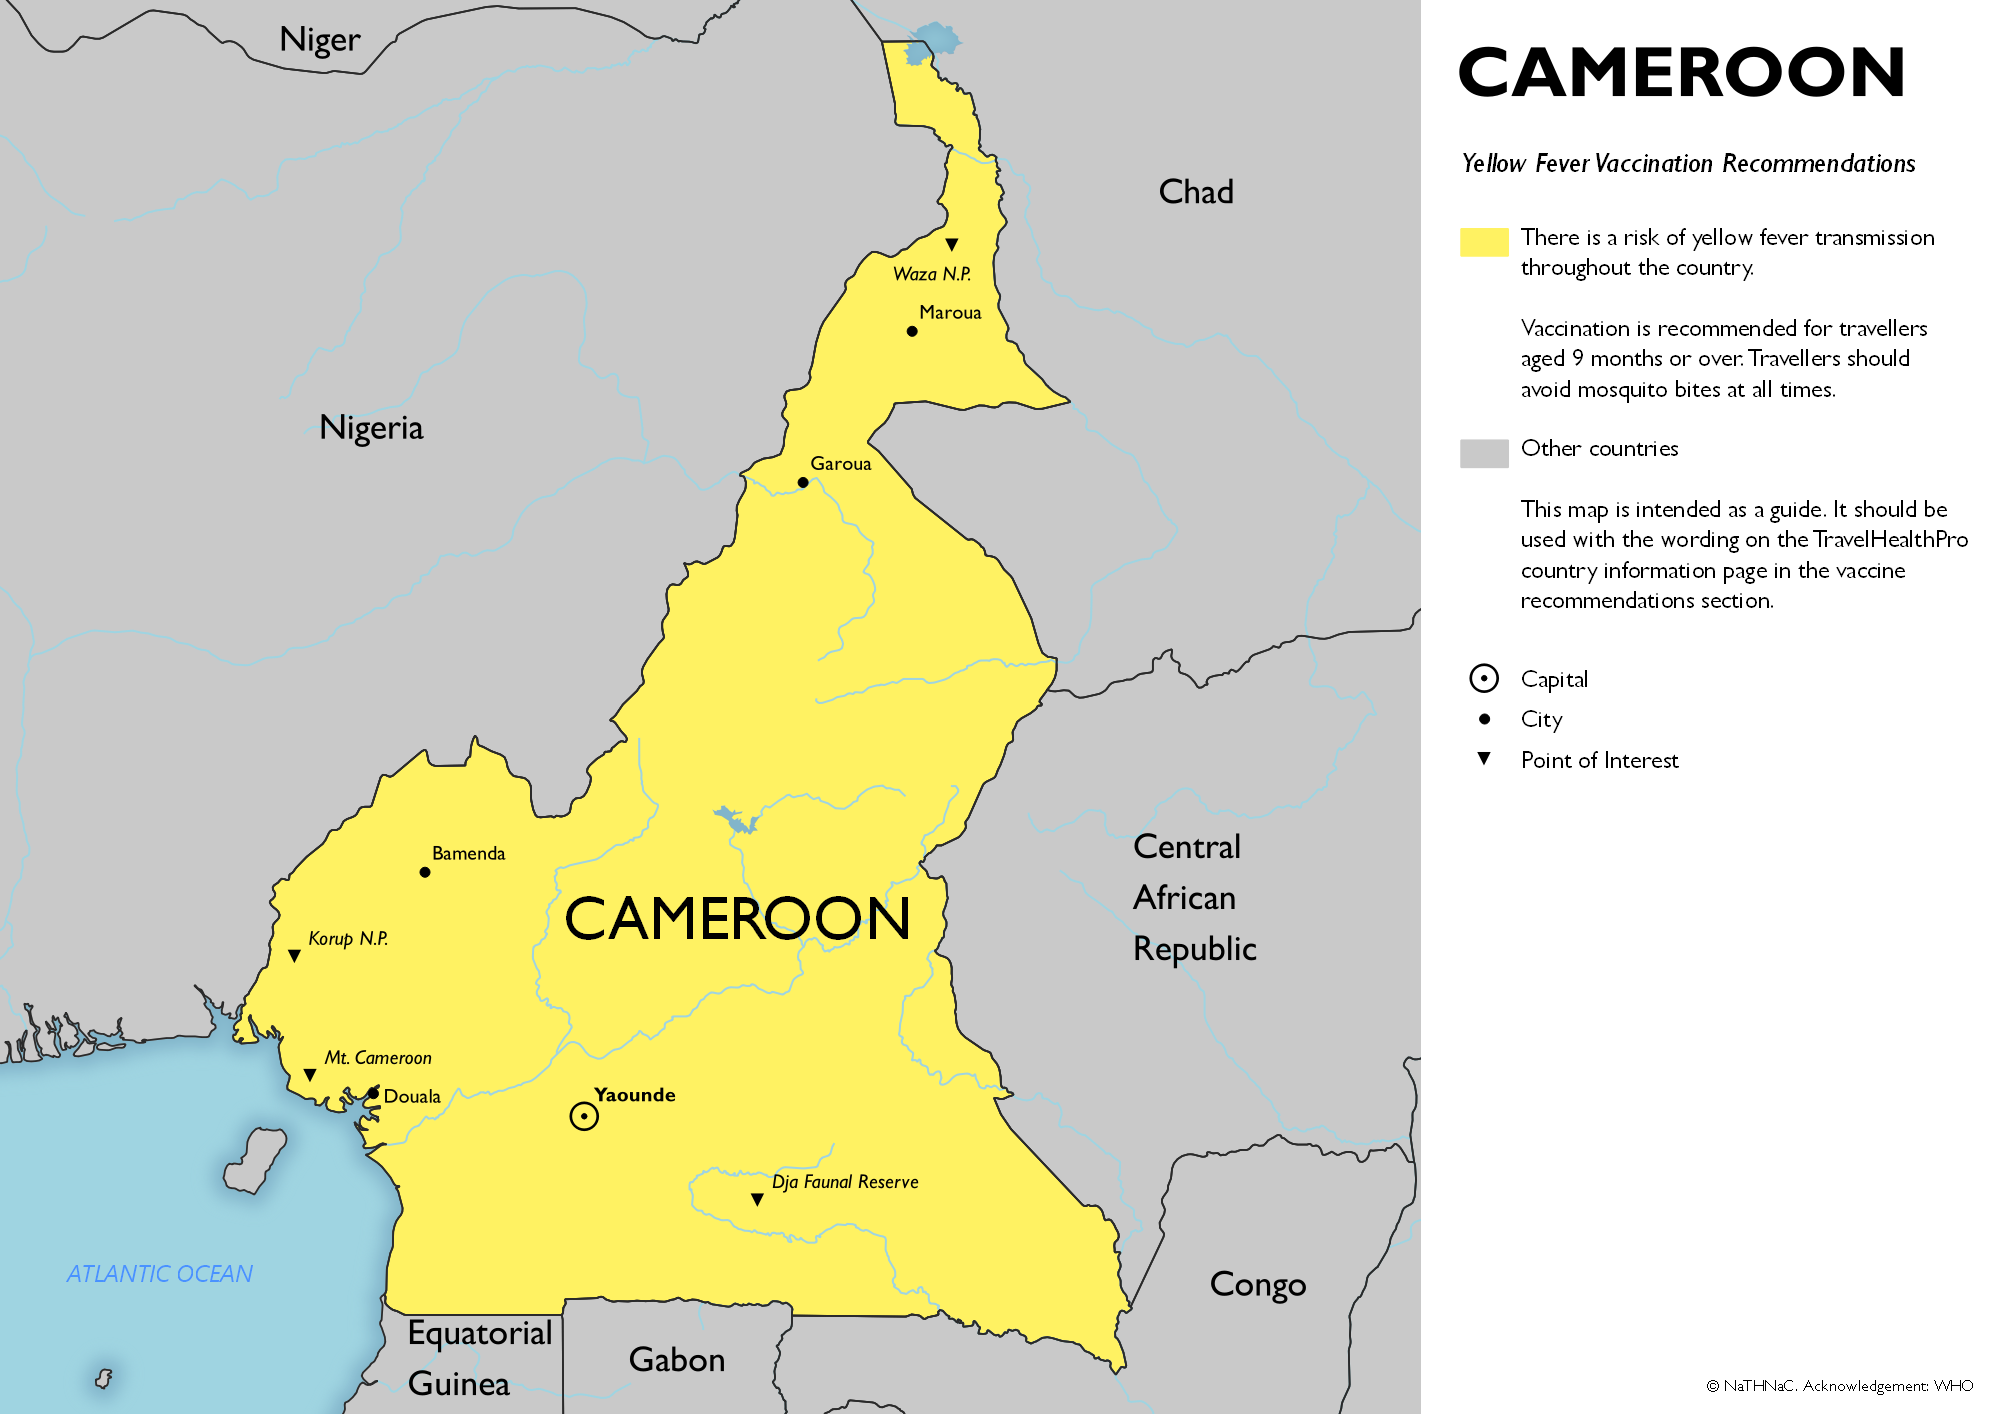 Yellow fever vaccine recommendation map for Cameroon